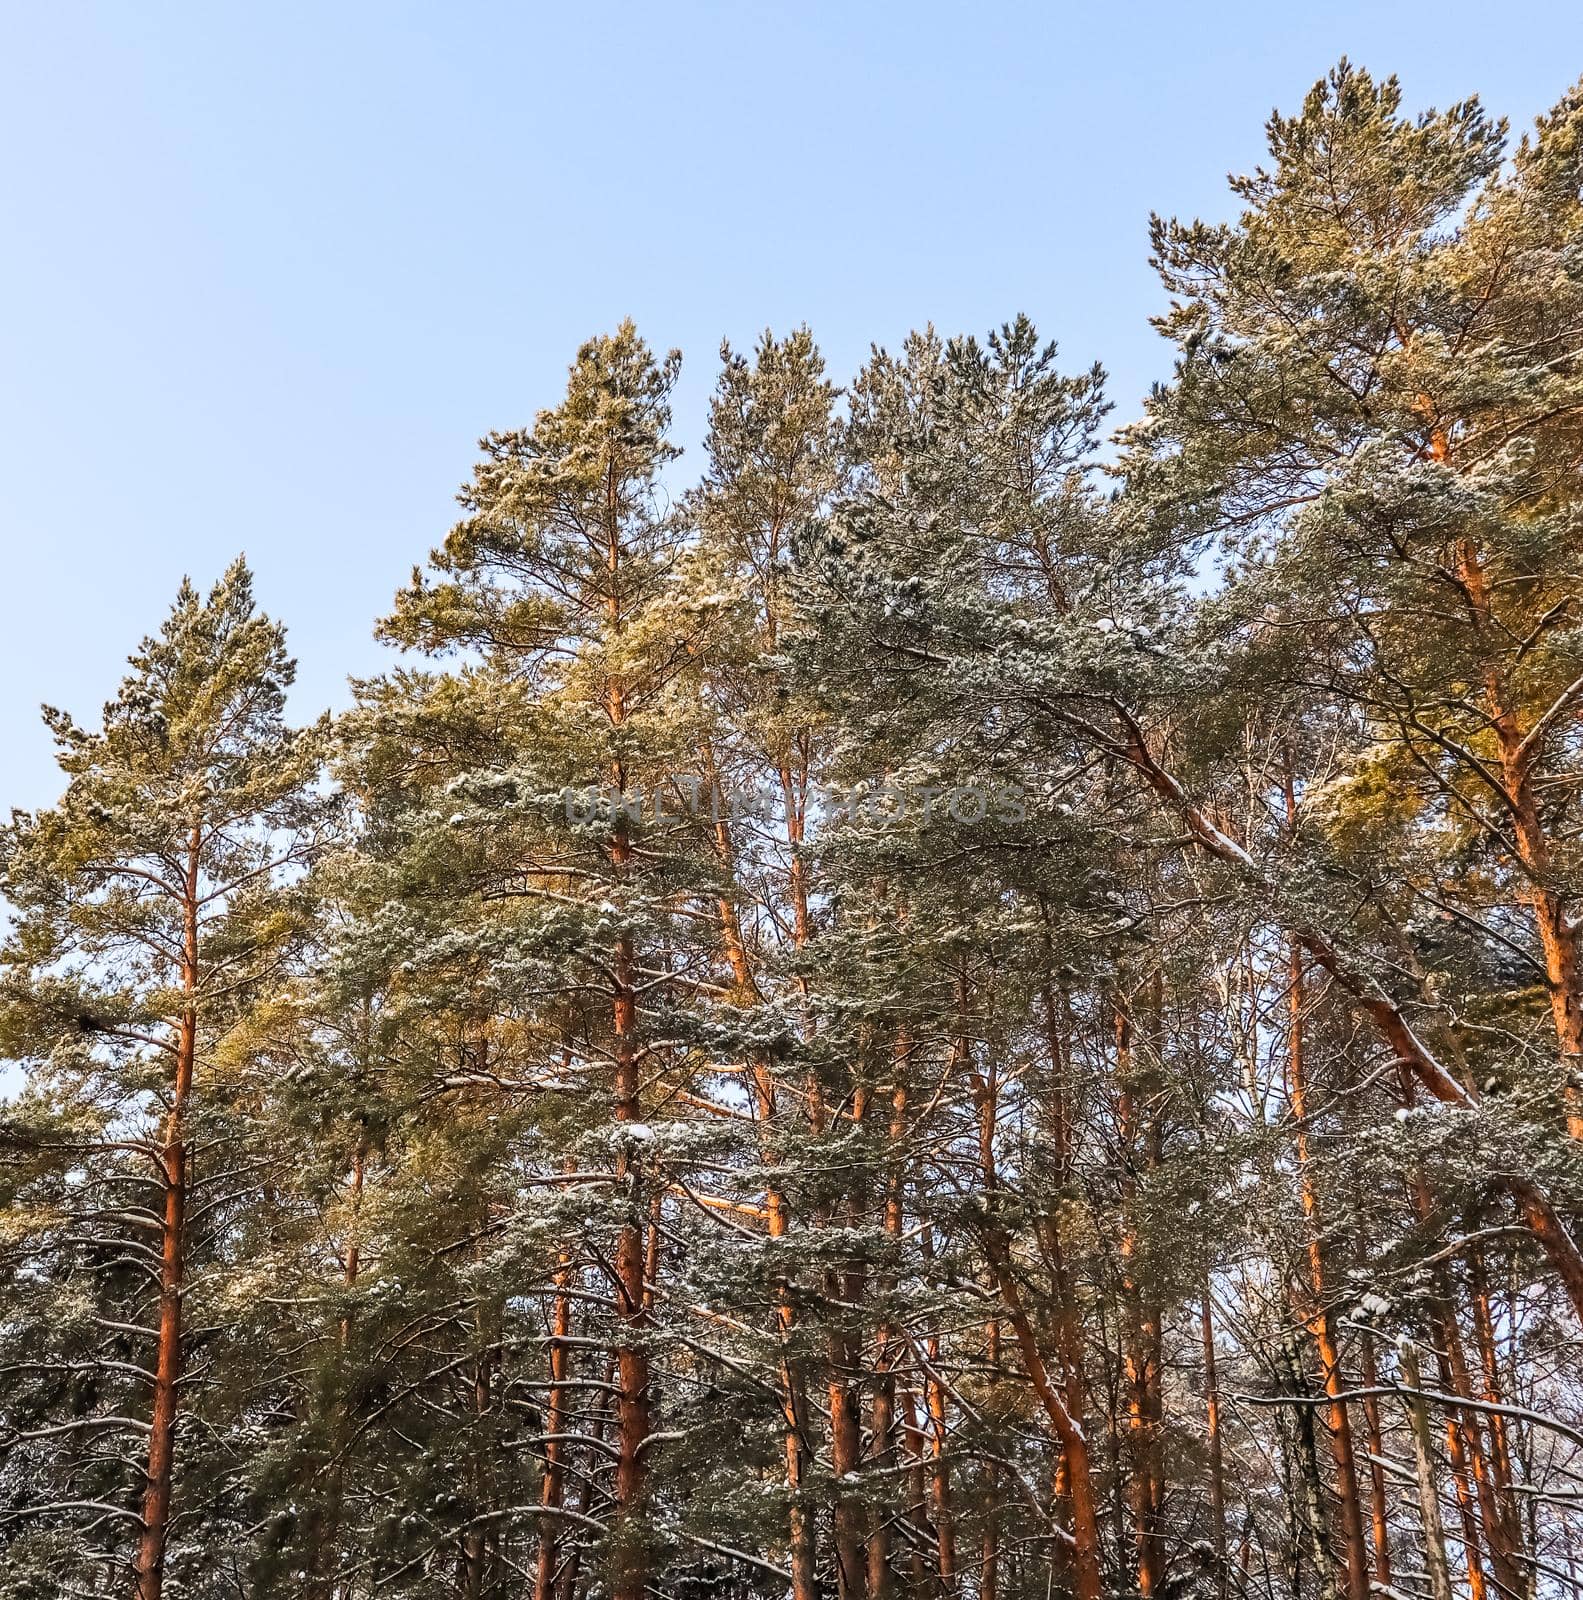 Snowy winter forest in a sunny day. Snow-covered pines in sunlight on a background of blue sky